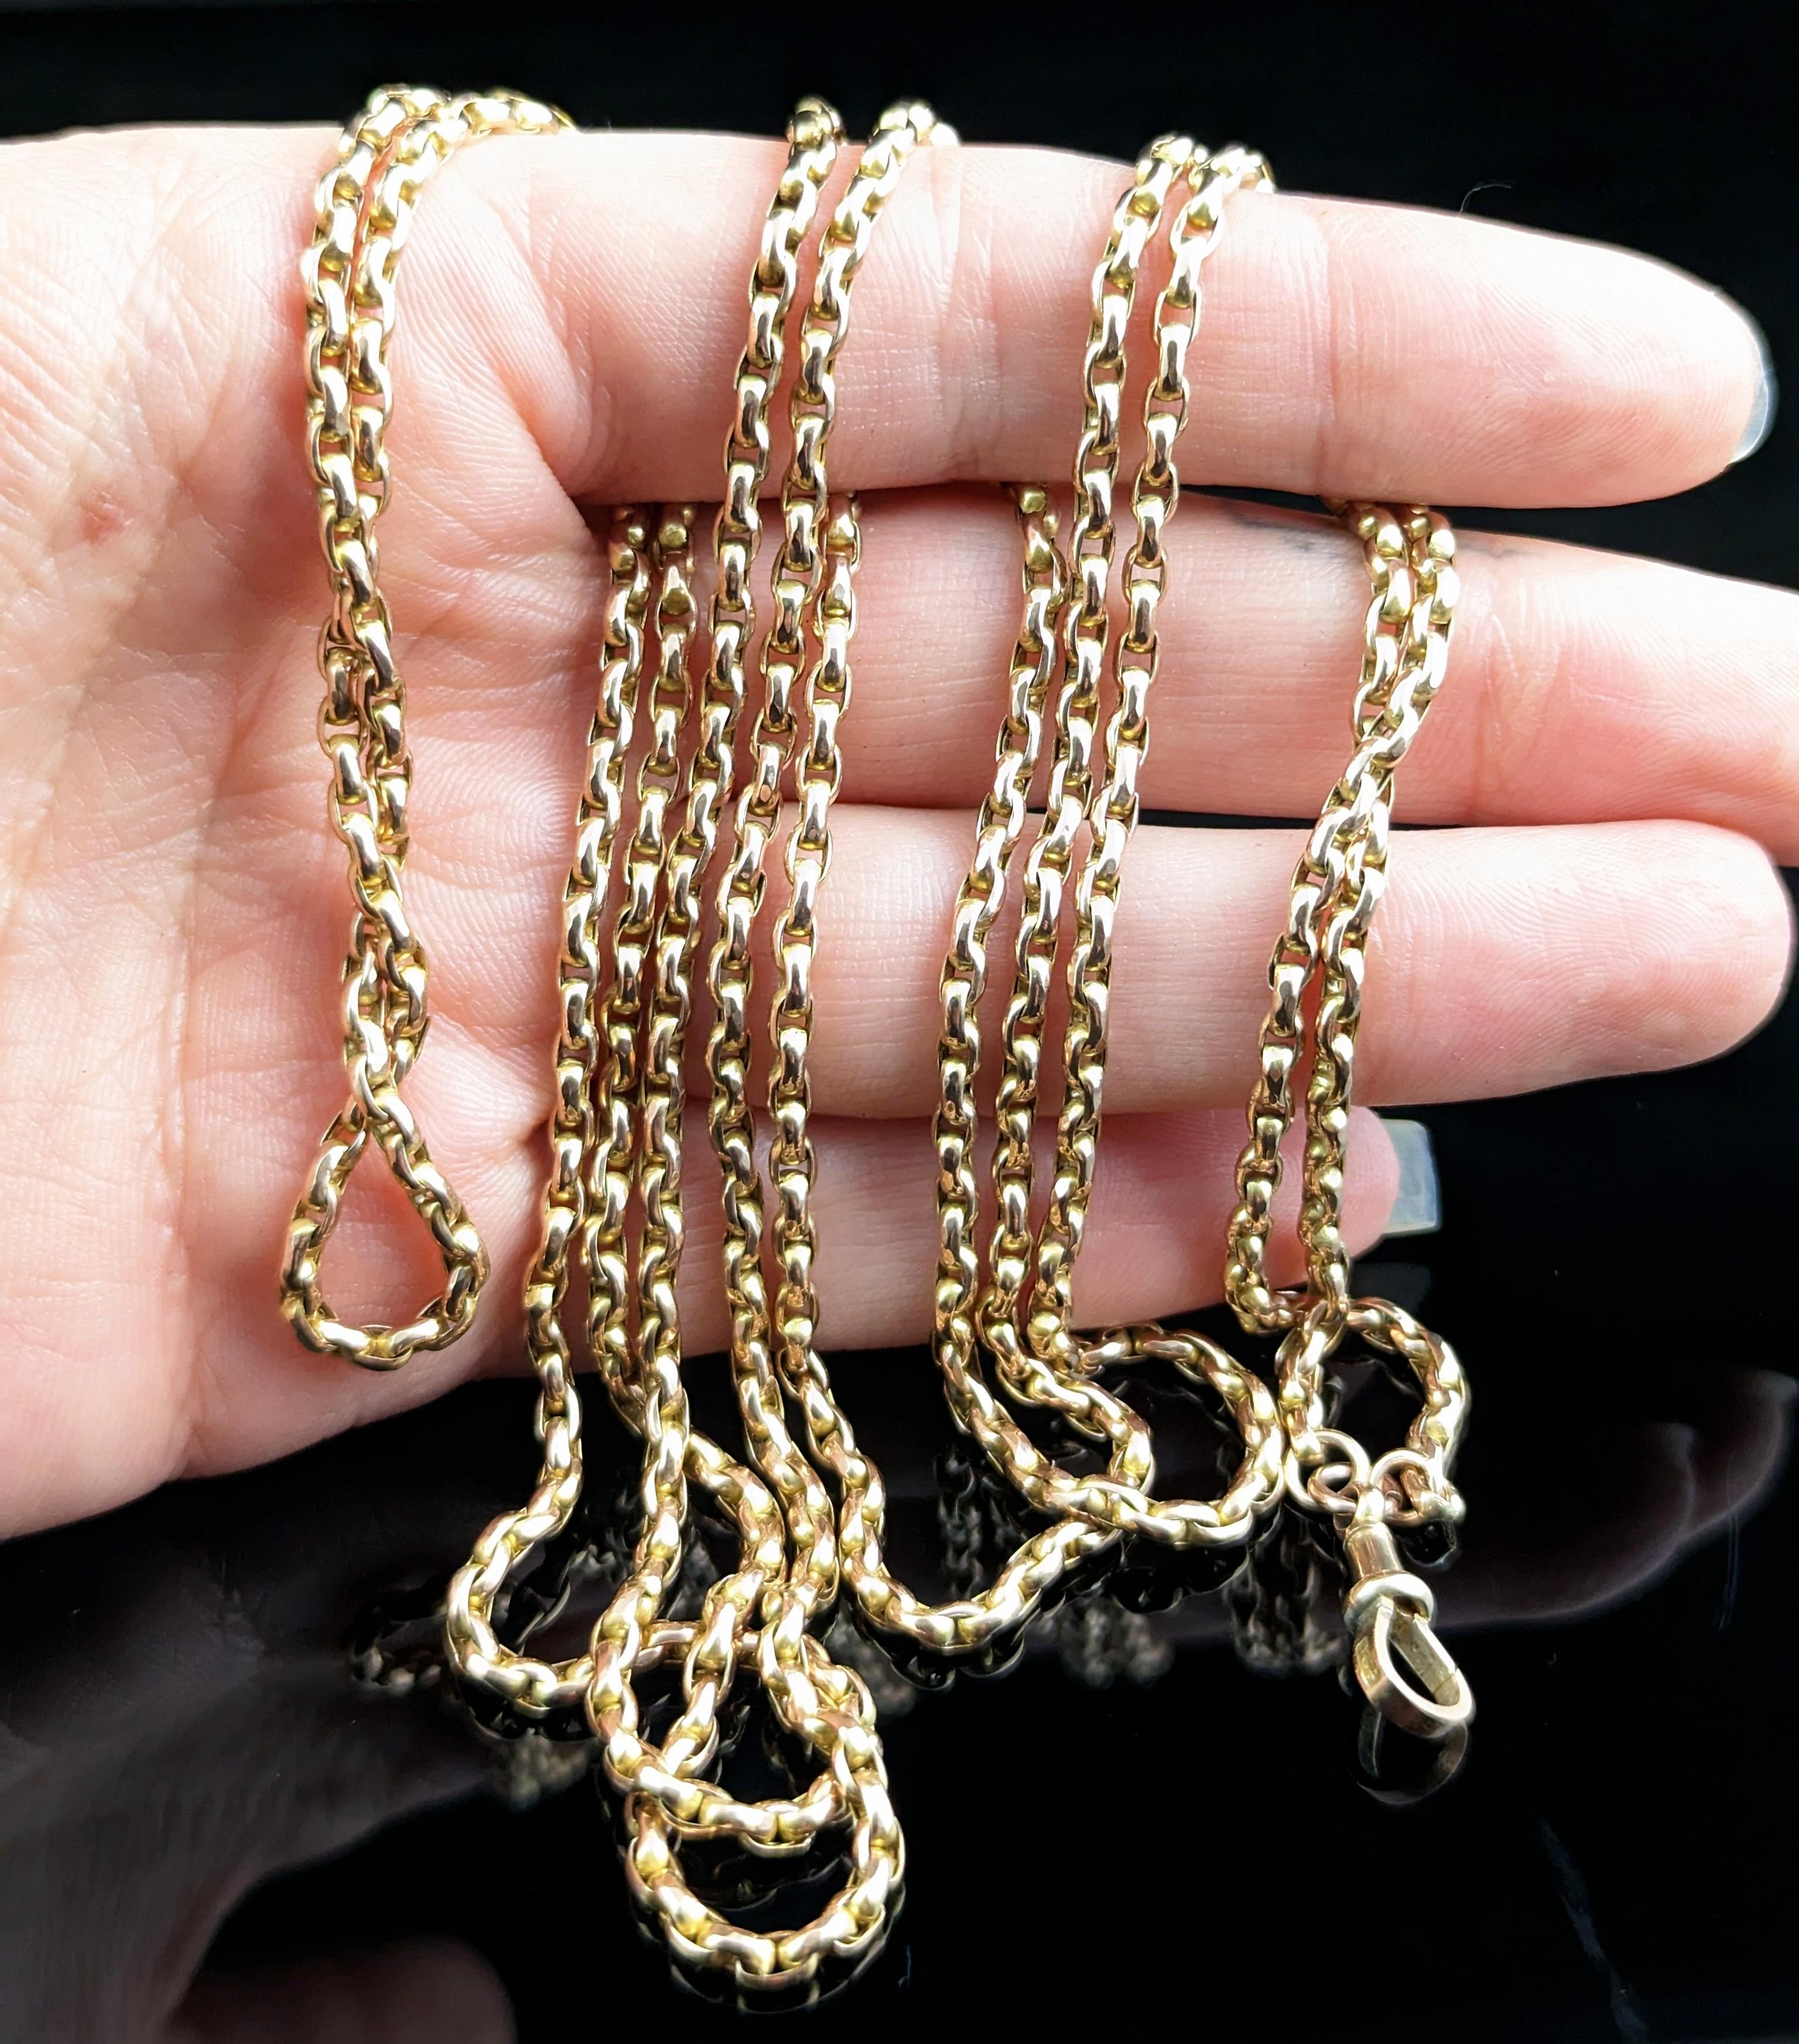 Antique 9k Yellow Gold Long Chain Necklace, Longuard, Victorian For Sale 3